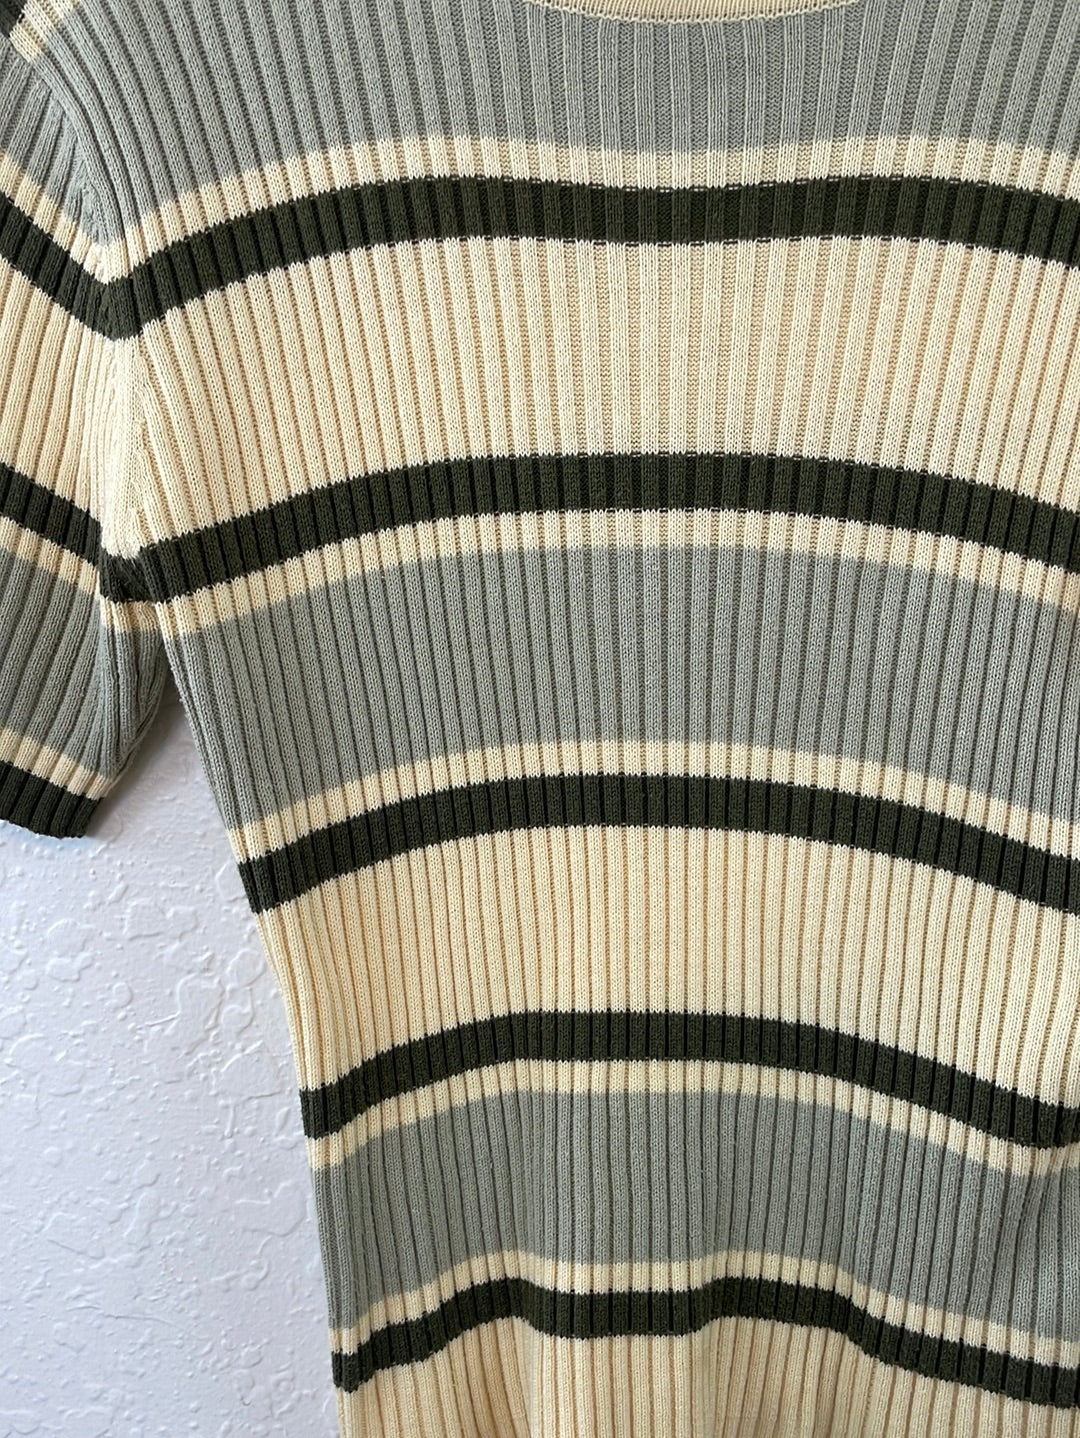 Striped ribbed top